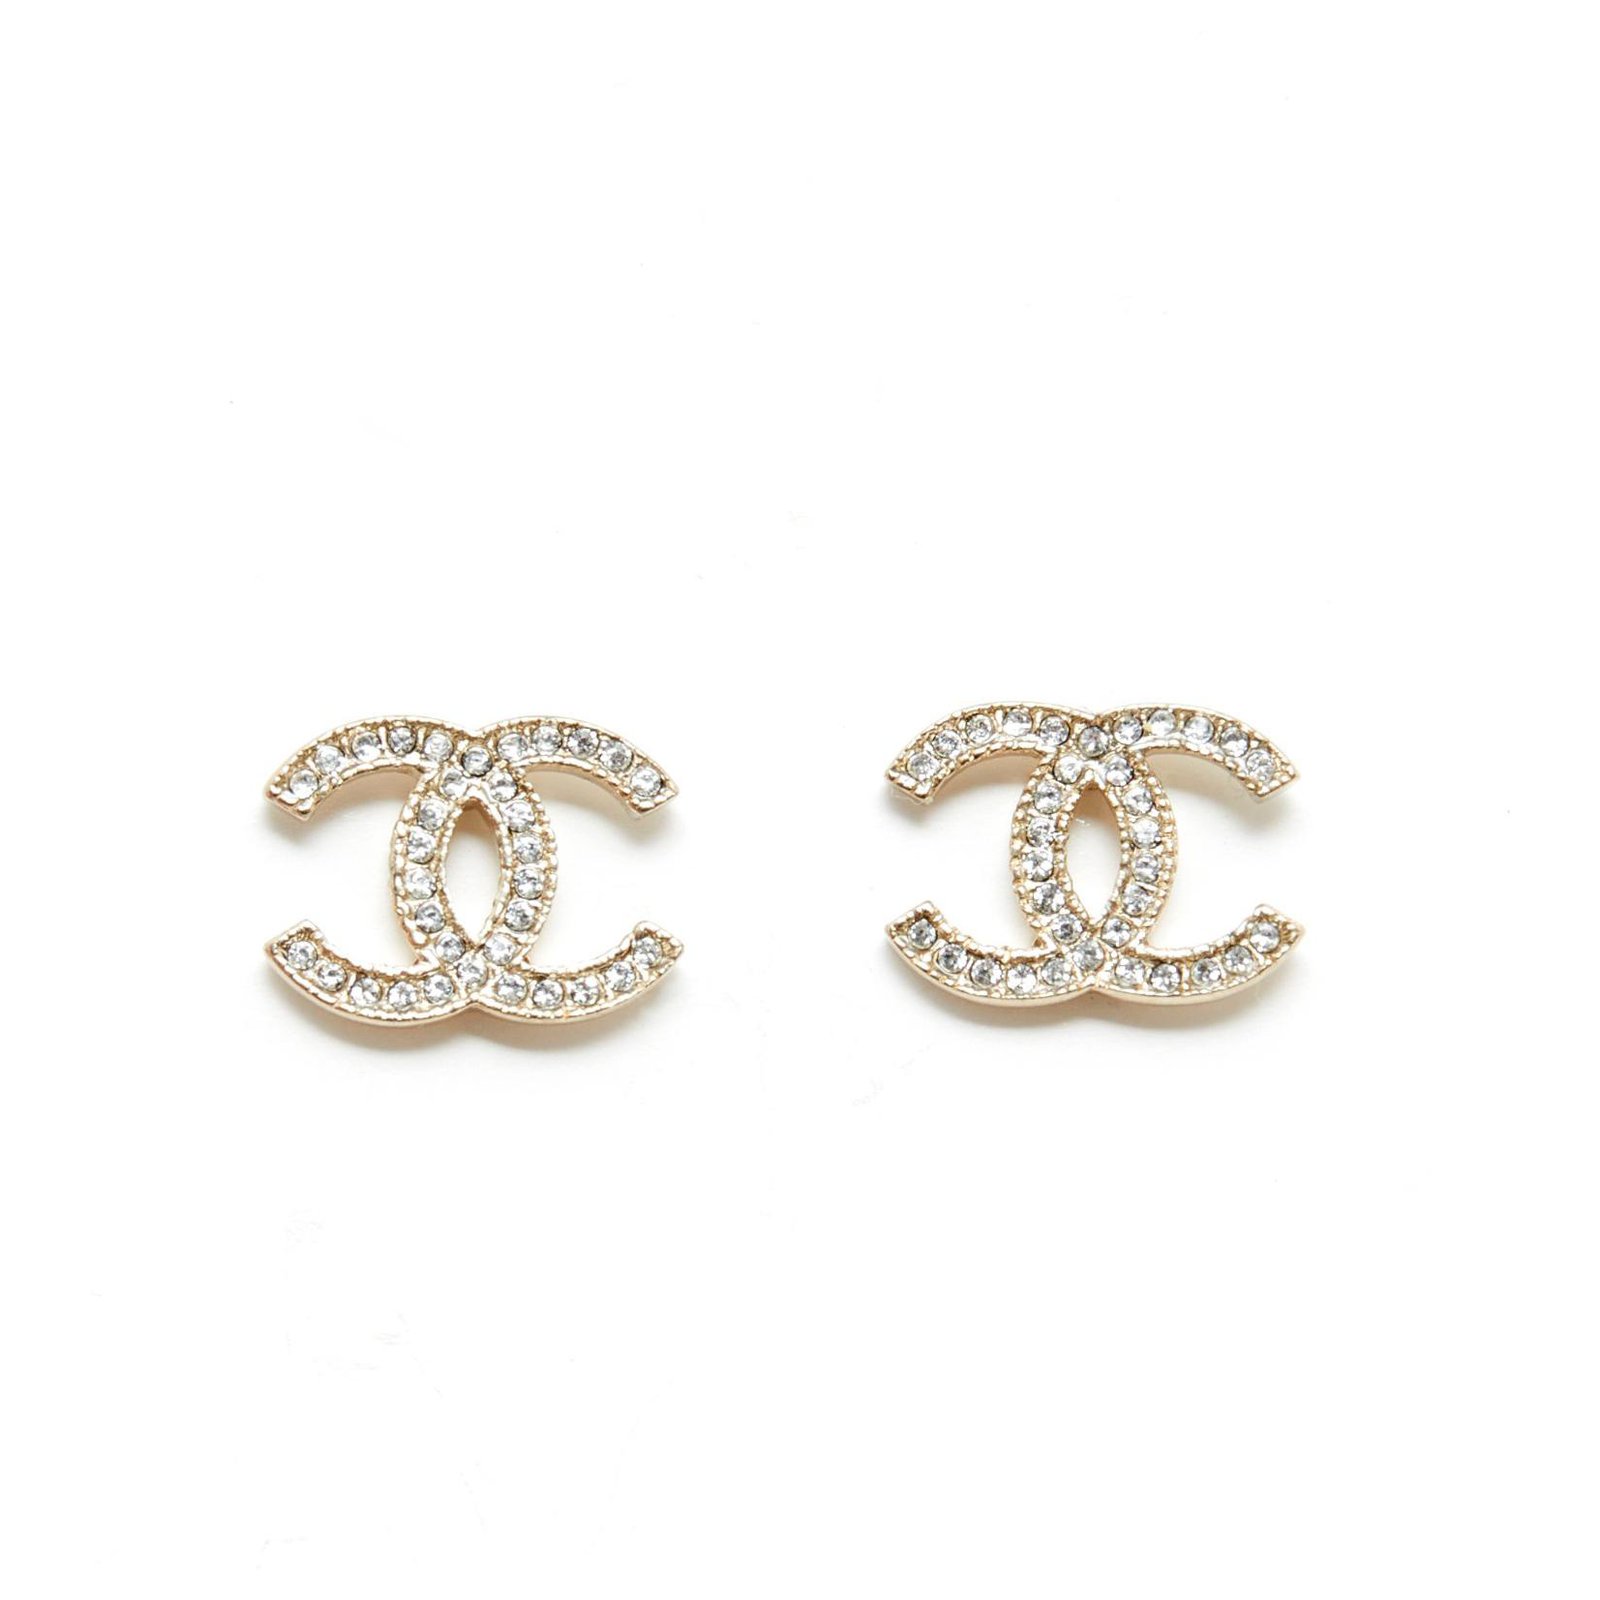 Chanel CHANEL Gripore Line Stone Earrings 2CC9 Gold EIT0045P7603